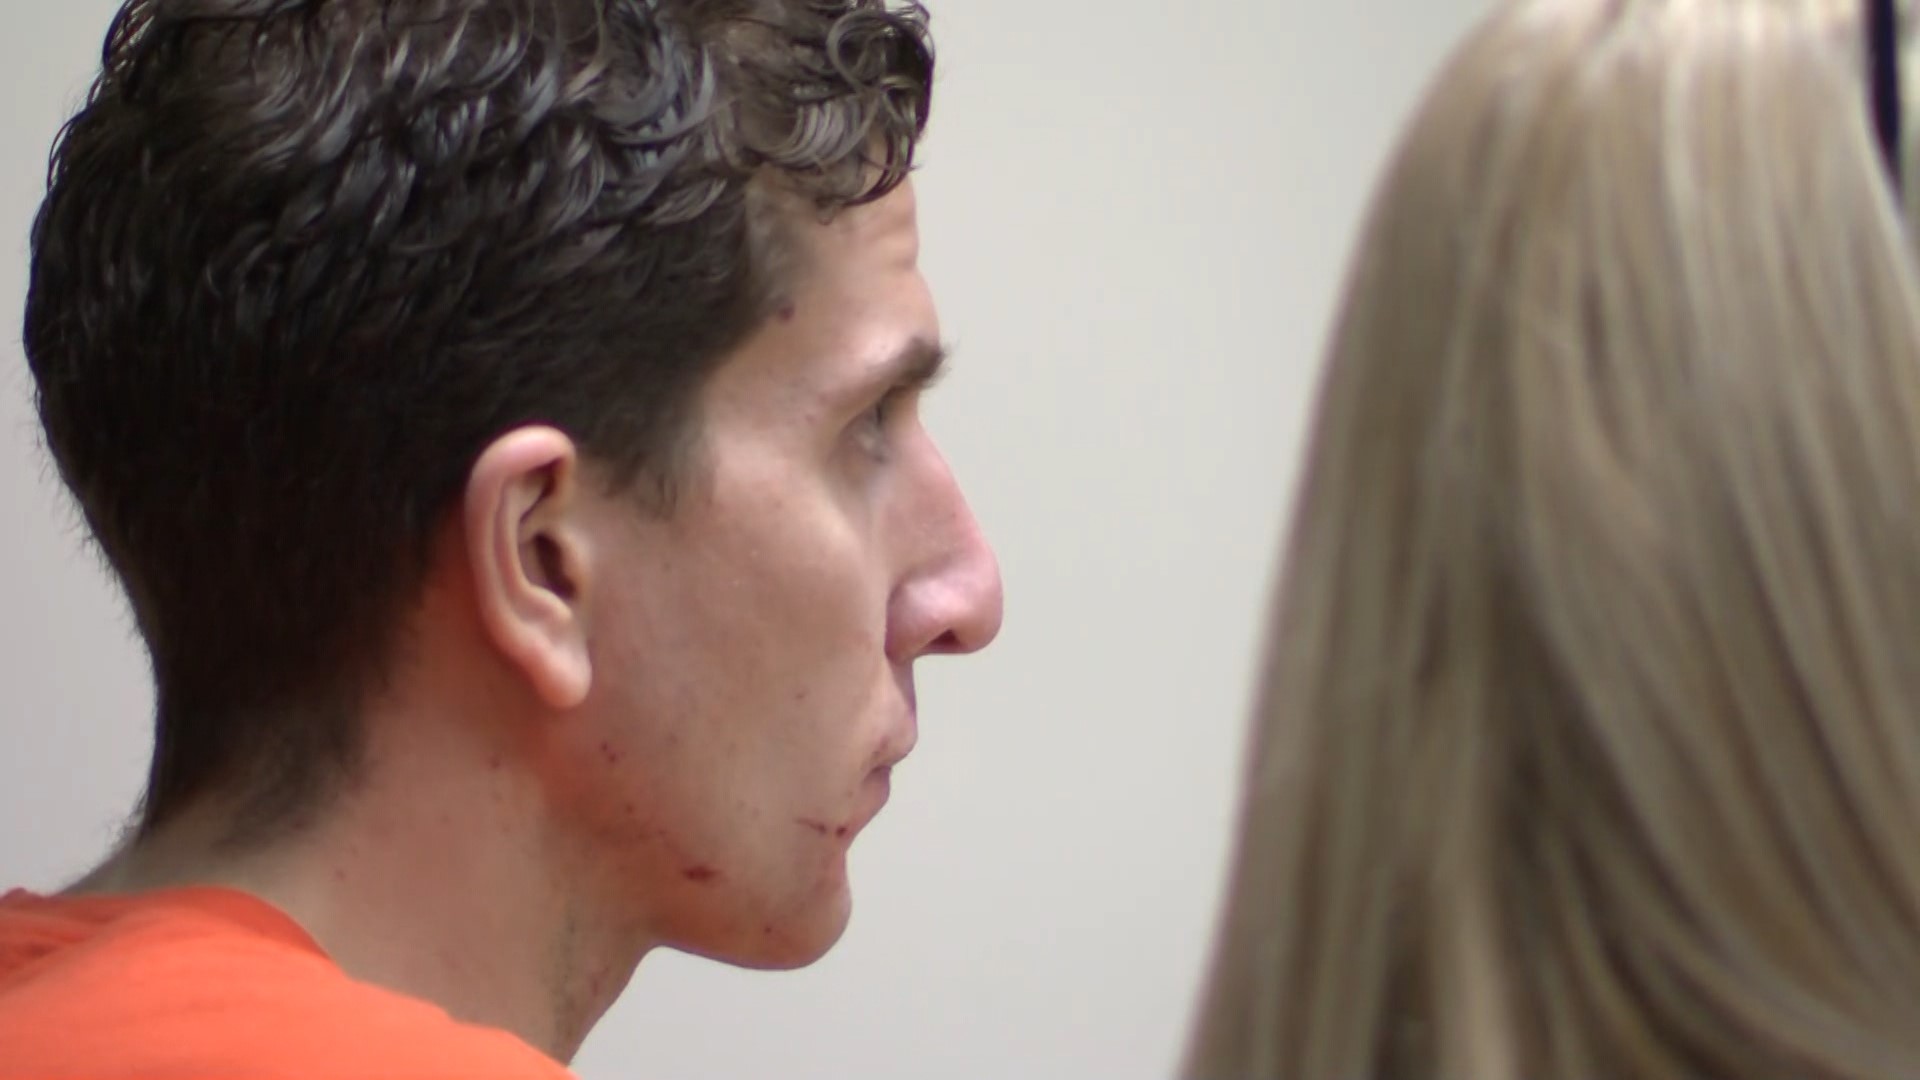 The suspect in the murders of four University of Idaho students appeared for a status hearing on Thursday, where a judge scheduled a preliminary hearing for June 26.